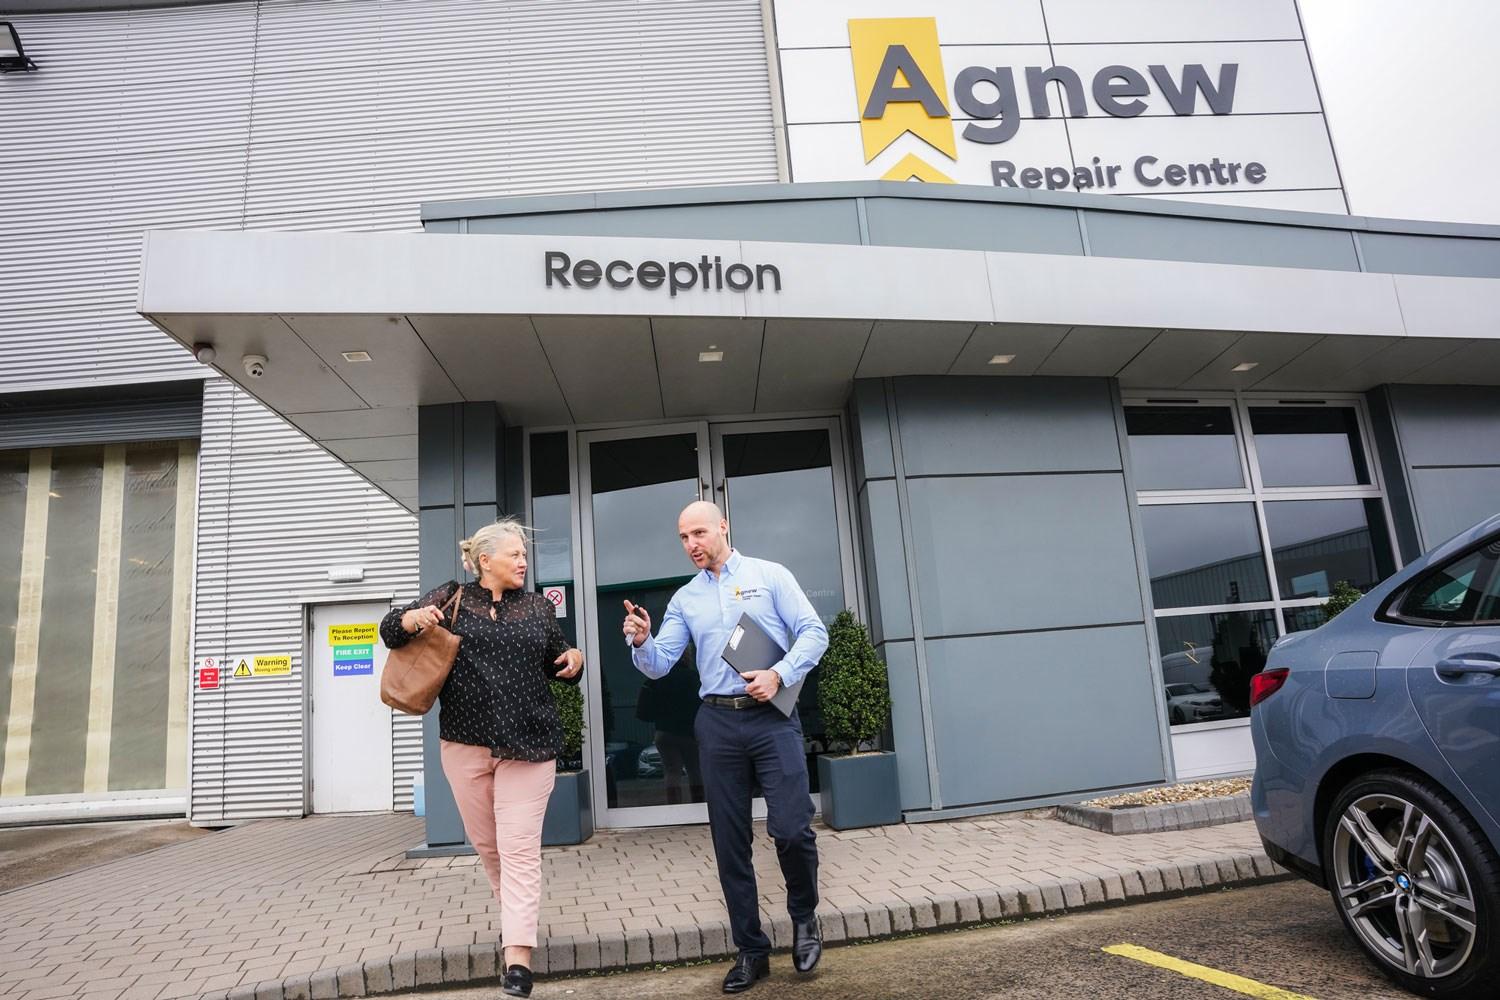 Agnew Repair Centre specialist talks to customer as they walk out of the reception at Agnew Repair Centre